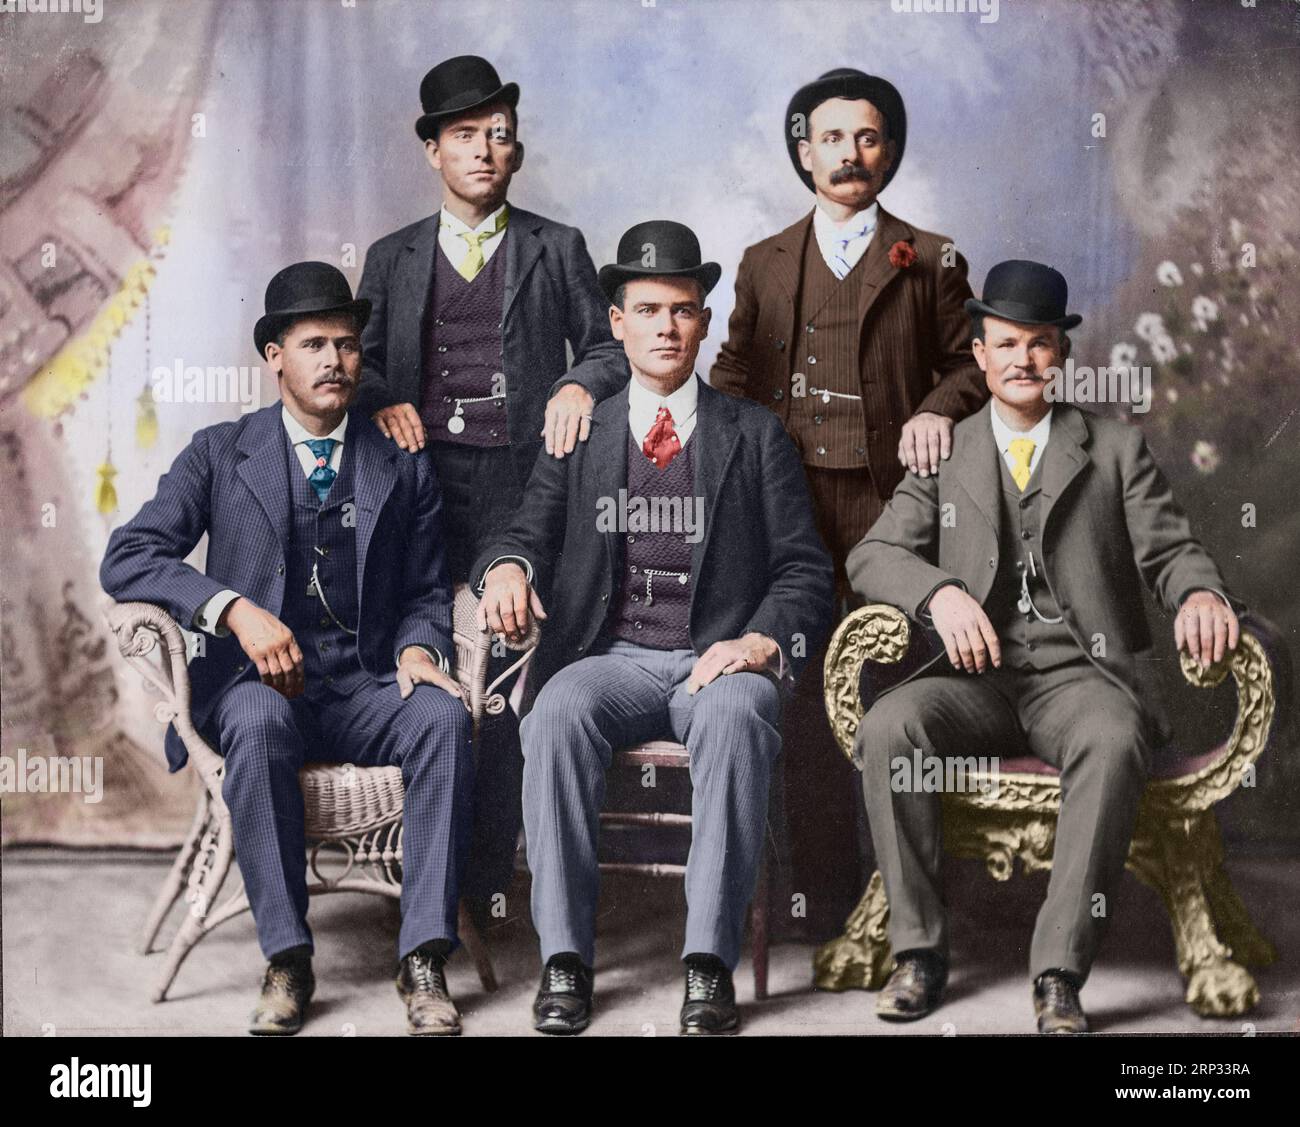 Butch Cassidy's Wild Bunch. This image is known as the 'Fort Worth Five Photograph.' Front row left to right: Harry A. Longabaugh, alias the Sundance Stock Photo